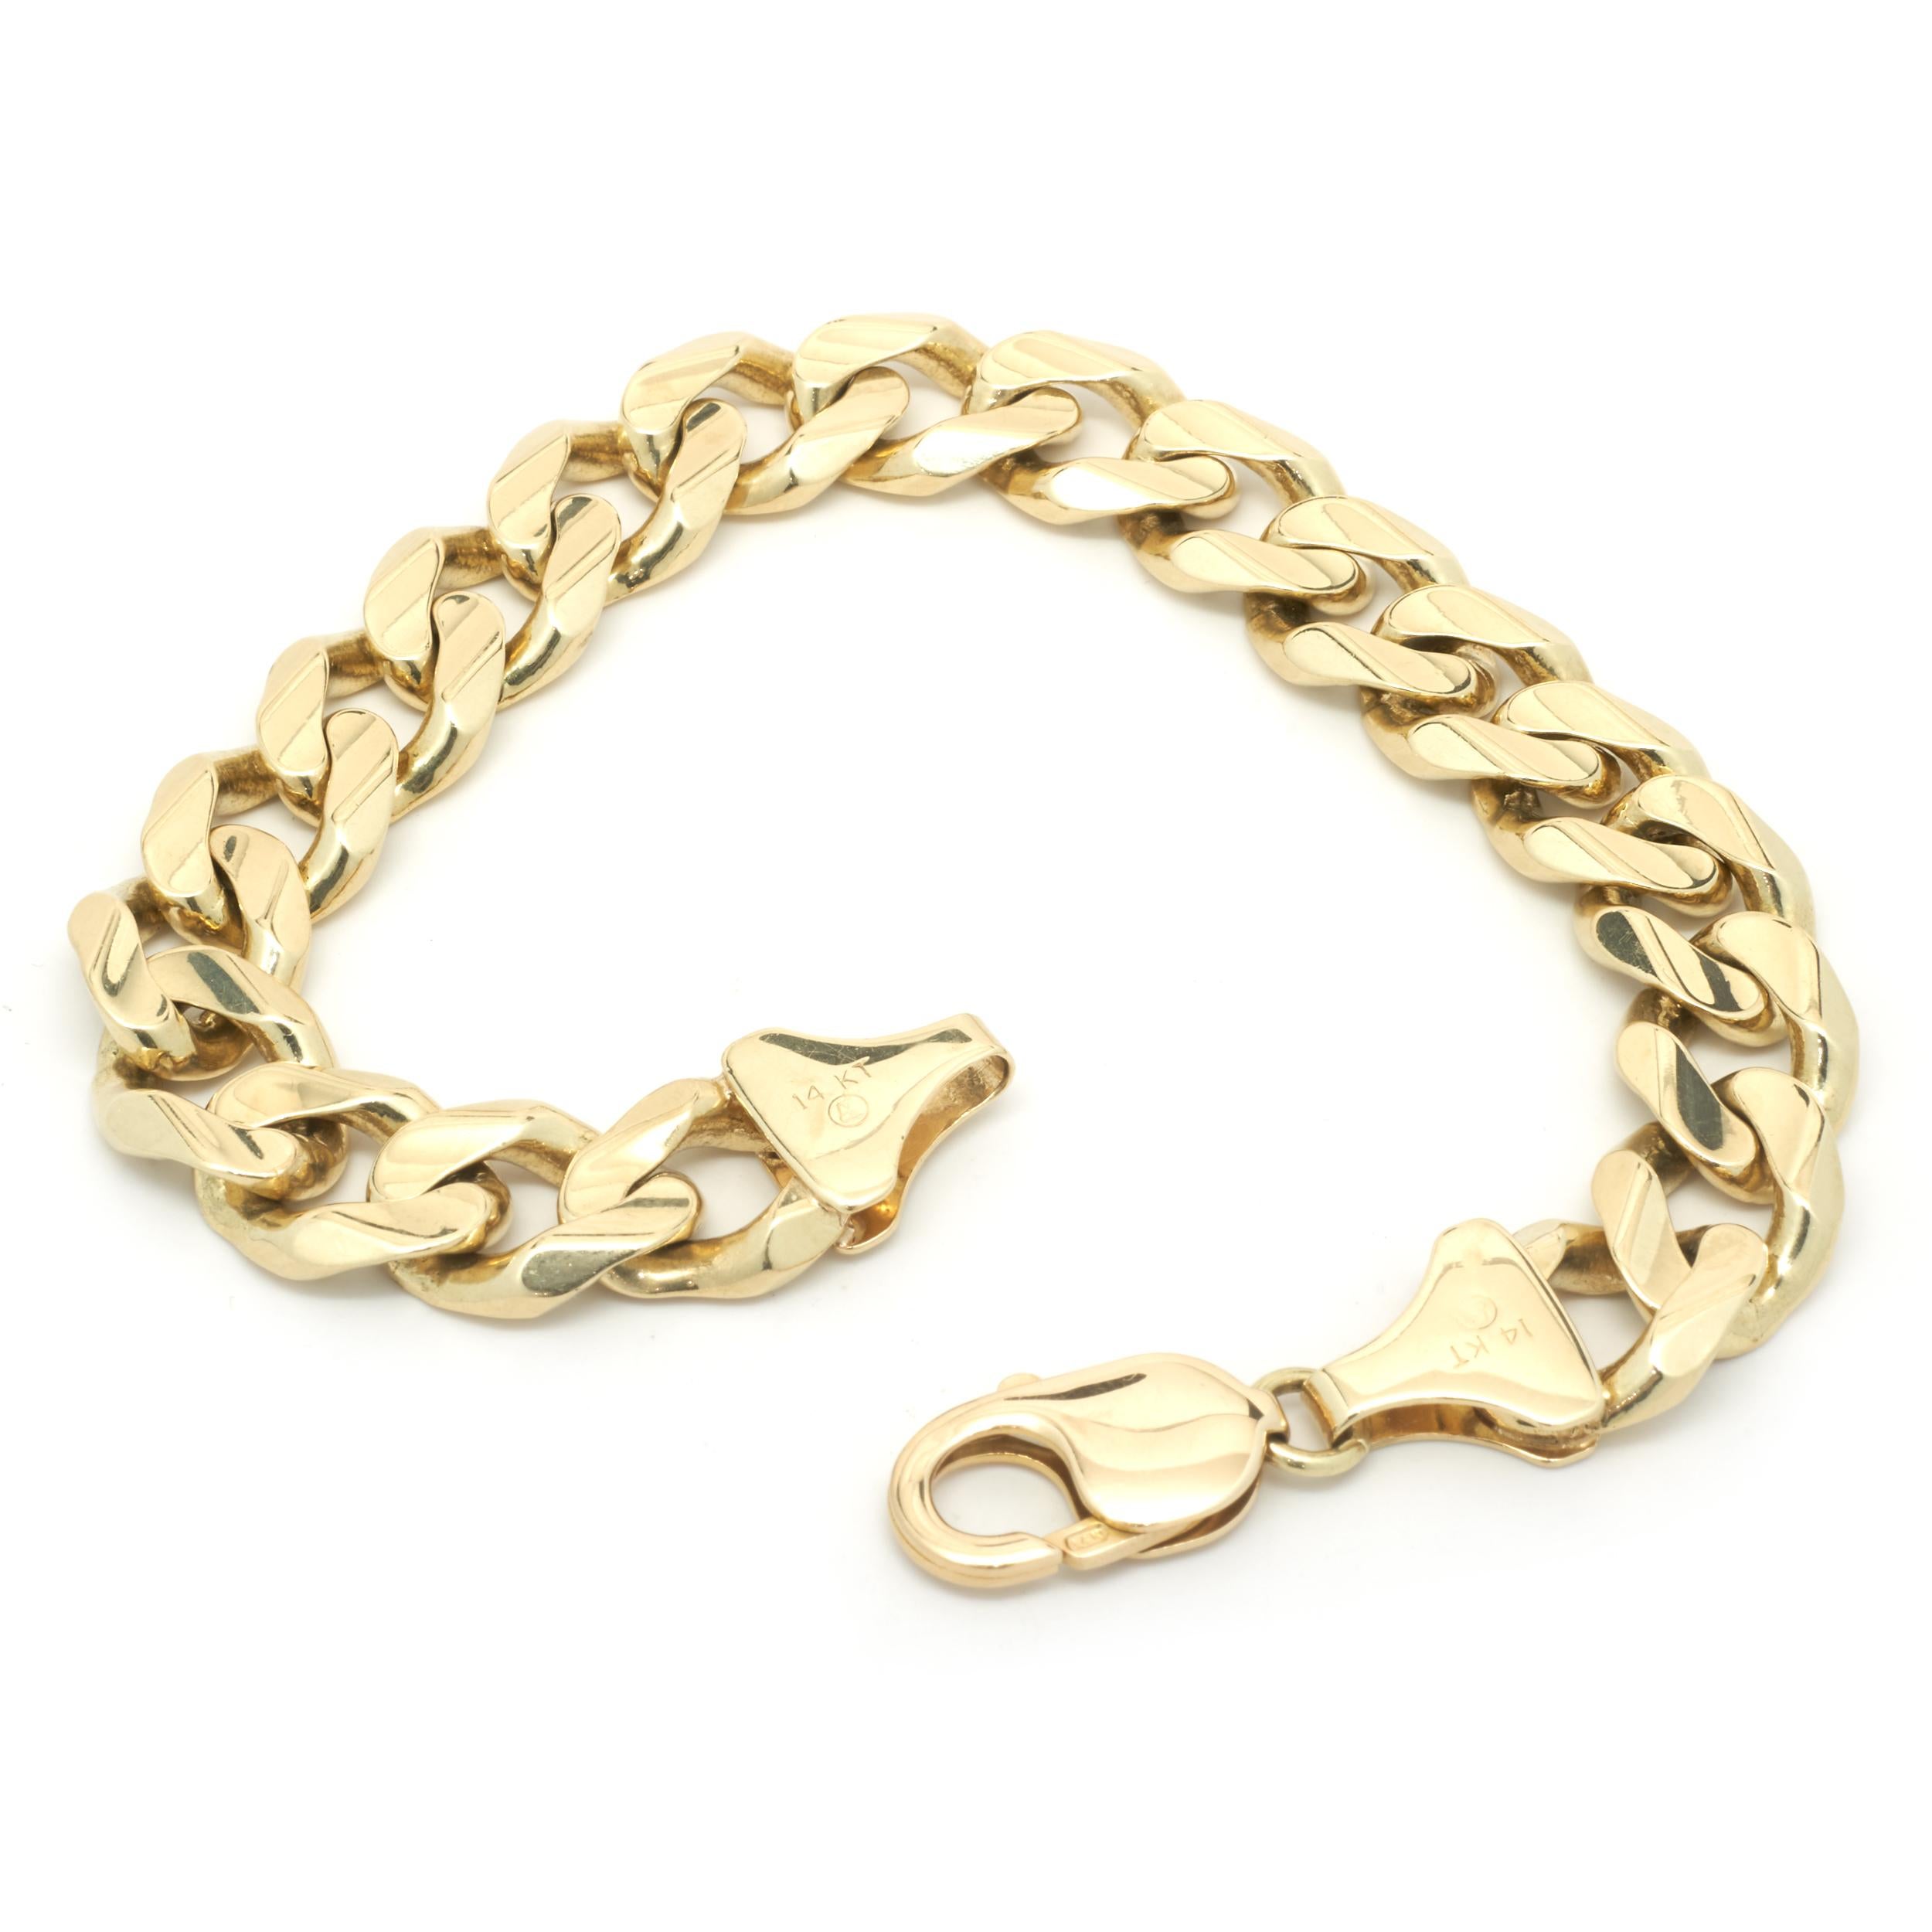 Designer: custom
Material: 14K yellow gold 
Dimensions: bracelet will fit up to a 8.75-inch wrist
Weight: 54.45 grams